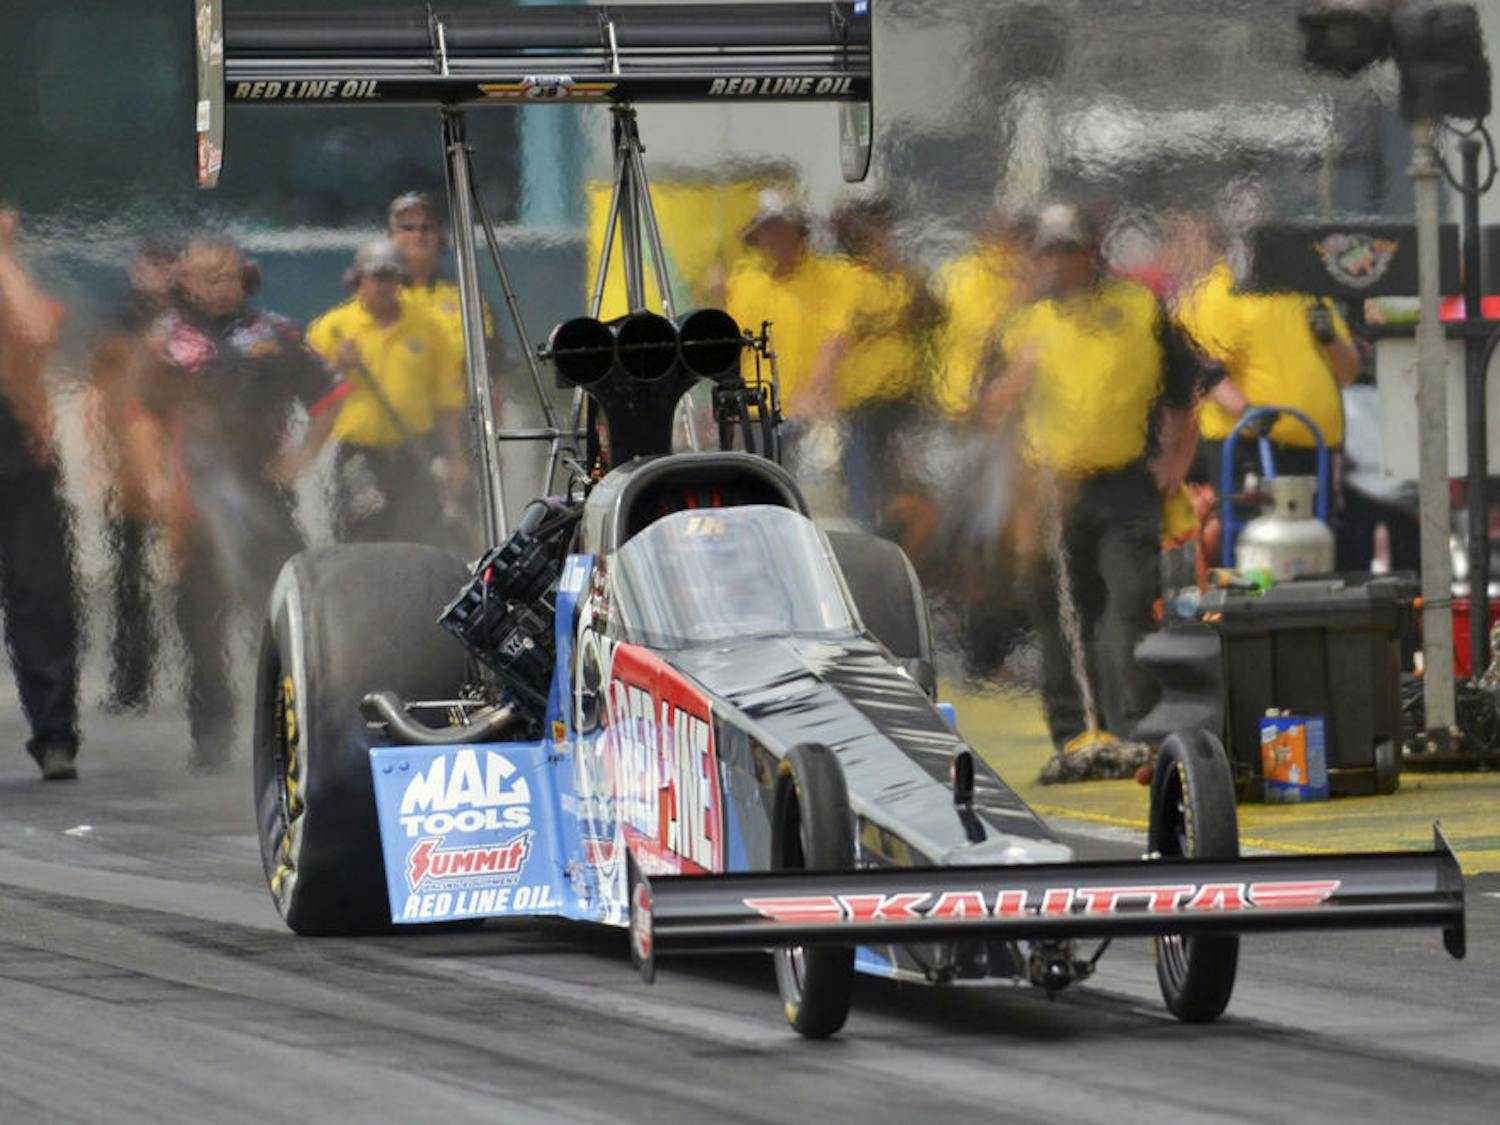 Top Fuel series drag racer J.R. Todd drives down the quarter-mile track at Gainesville's Auto Plus Raceway during a qualifying round at the 2015 Gatornationals on March 14, 2015.